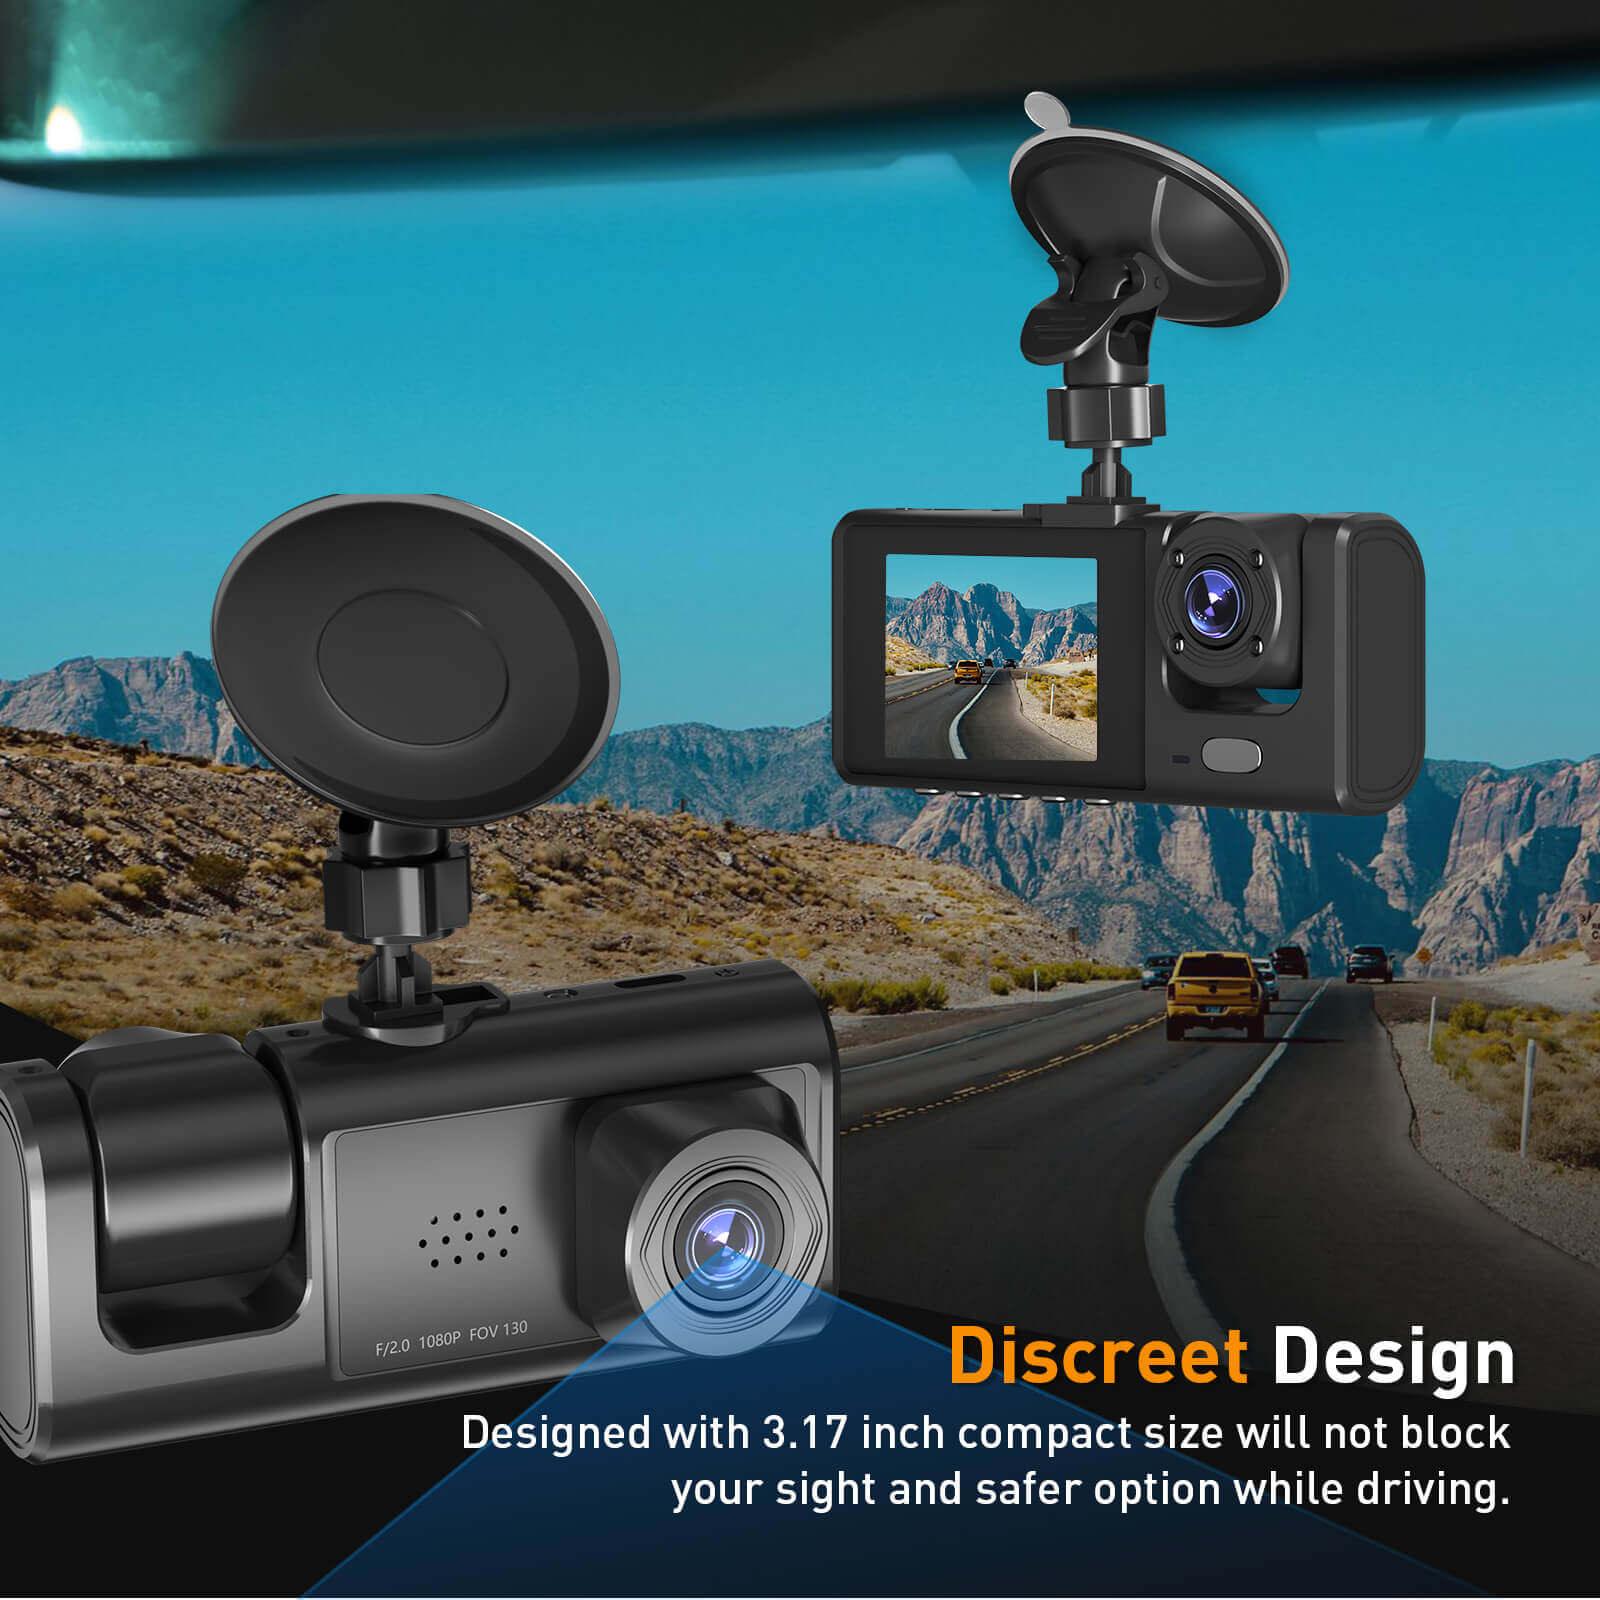 Cost-effective and Most worthwhile XGODY 3 Channel Dash Cam, FHD 1080P Dash Camera, 32GB Night Vision Loop Recording - XGODY 